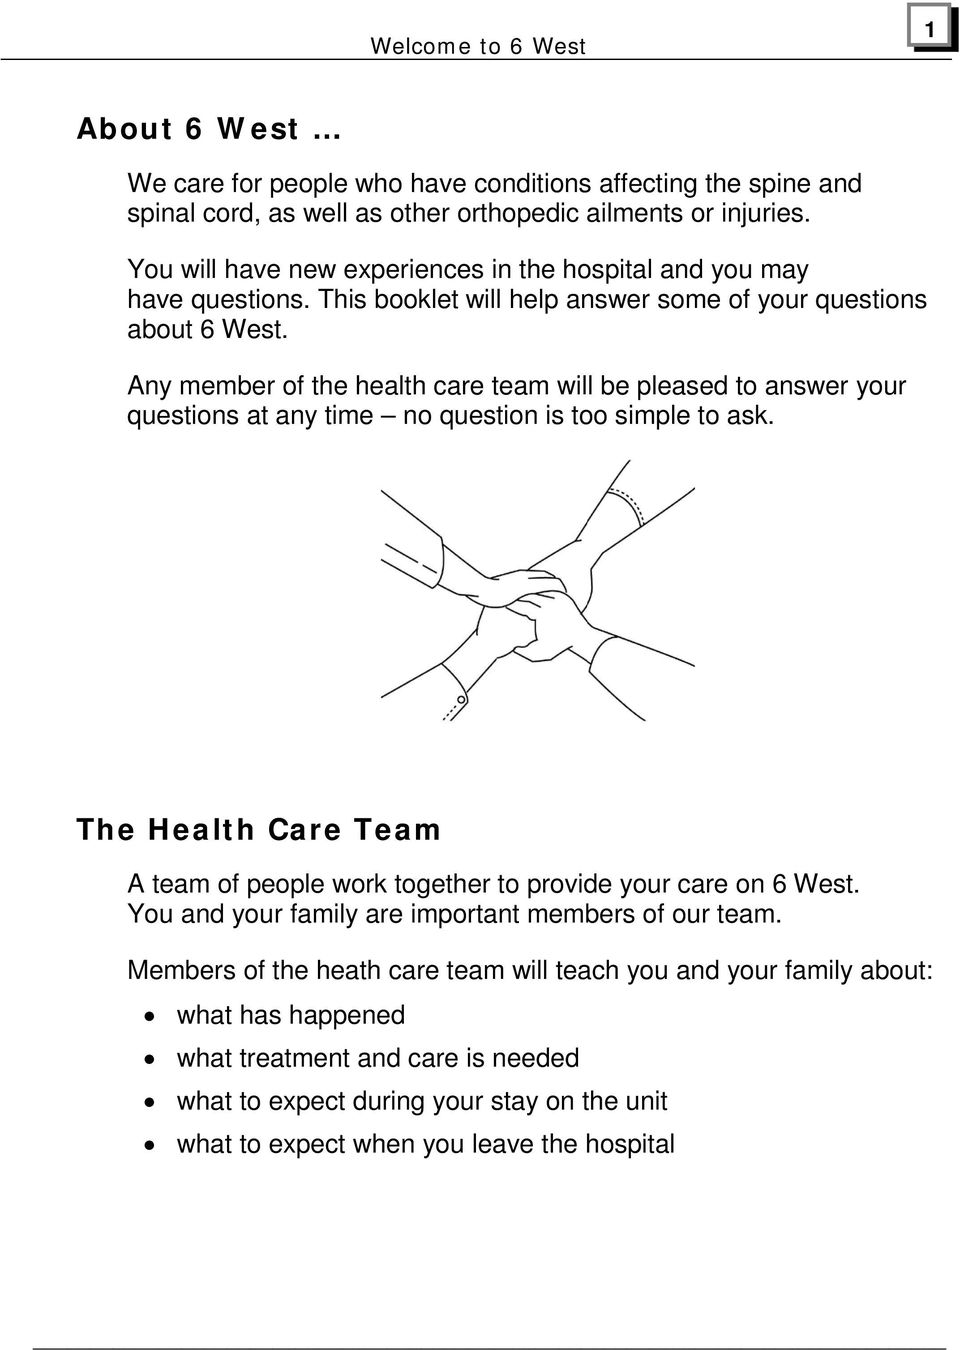 Any member of the health care team will be pleased to answer your questions at any time no question is too simple to ask.